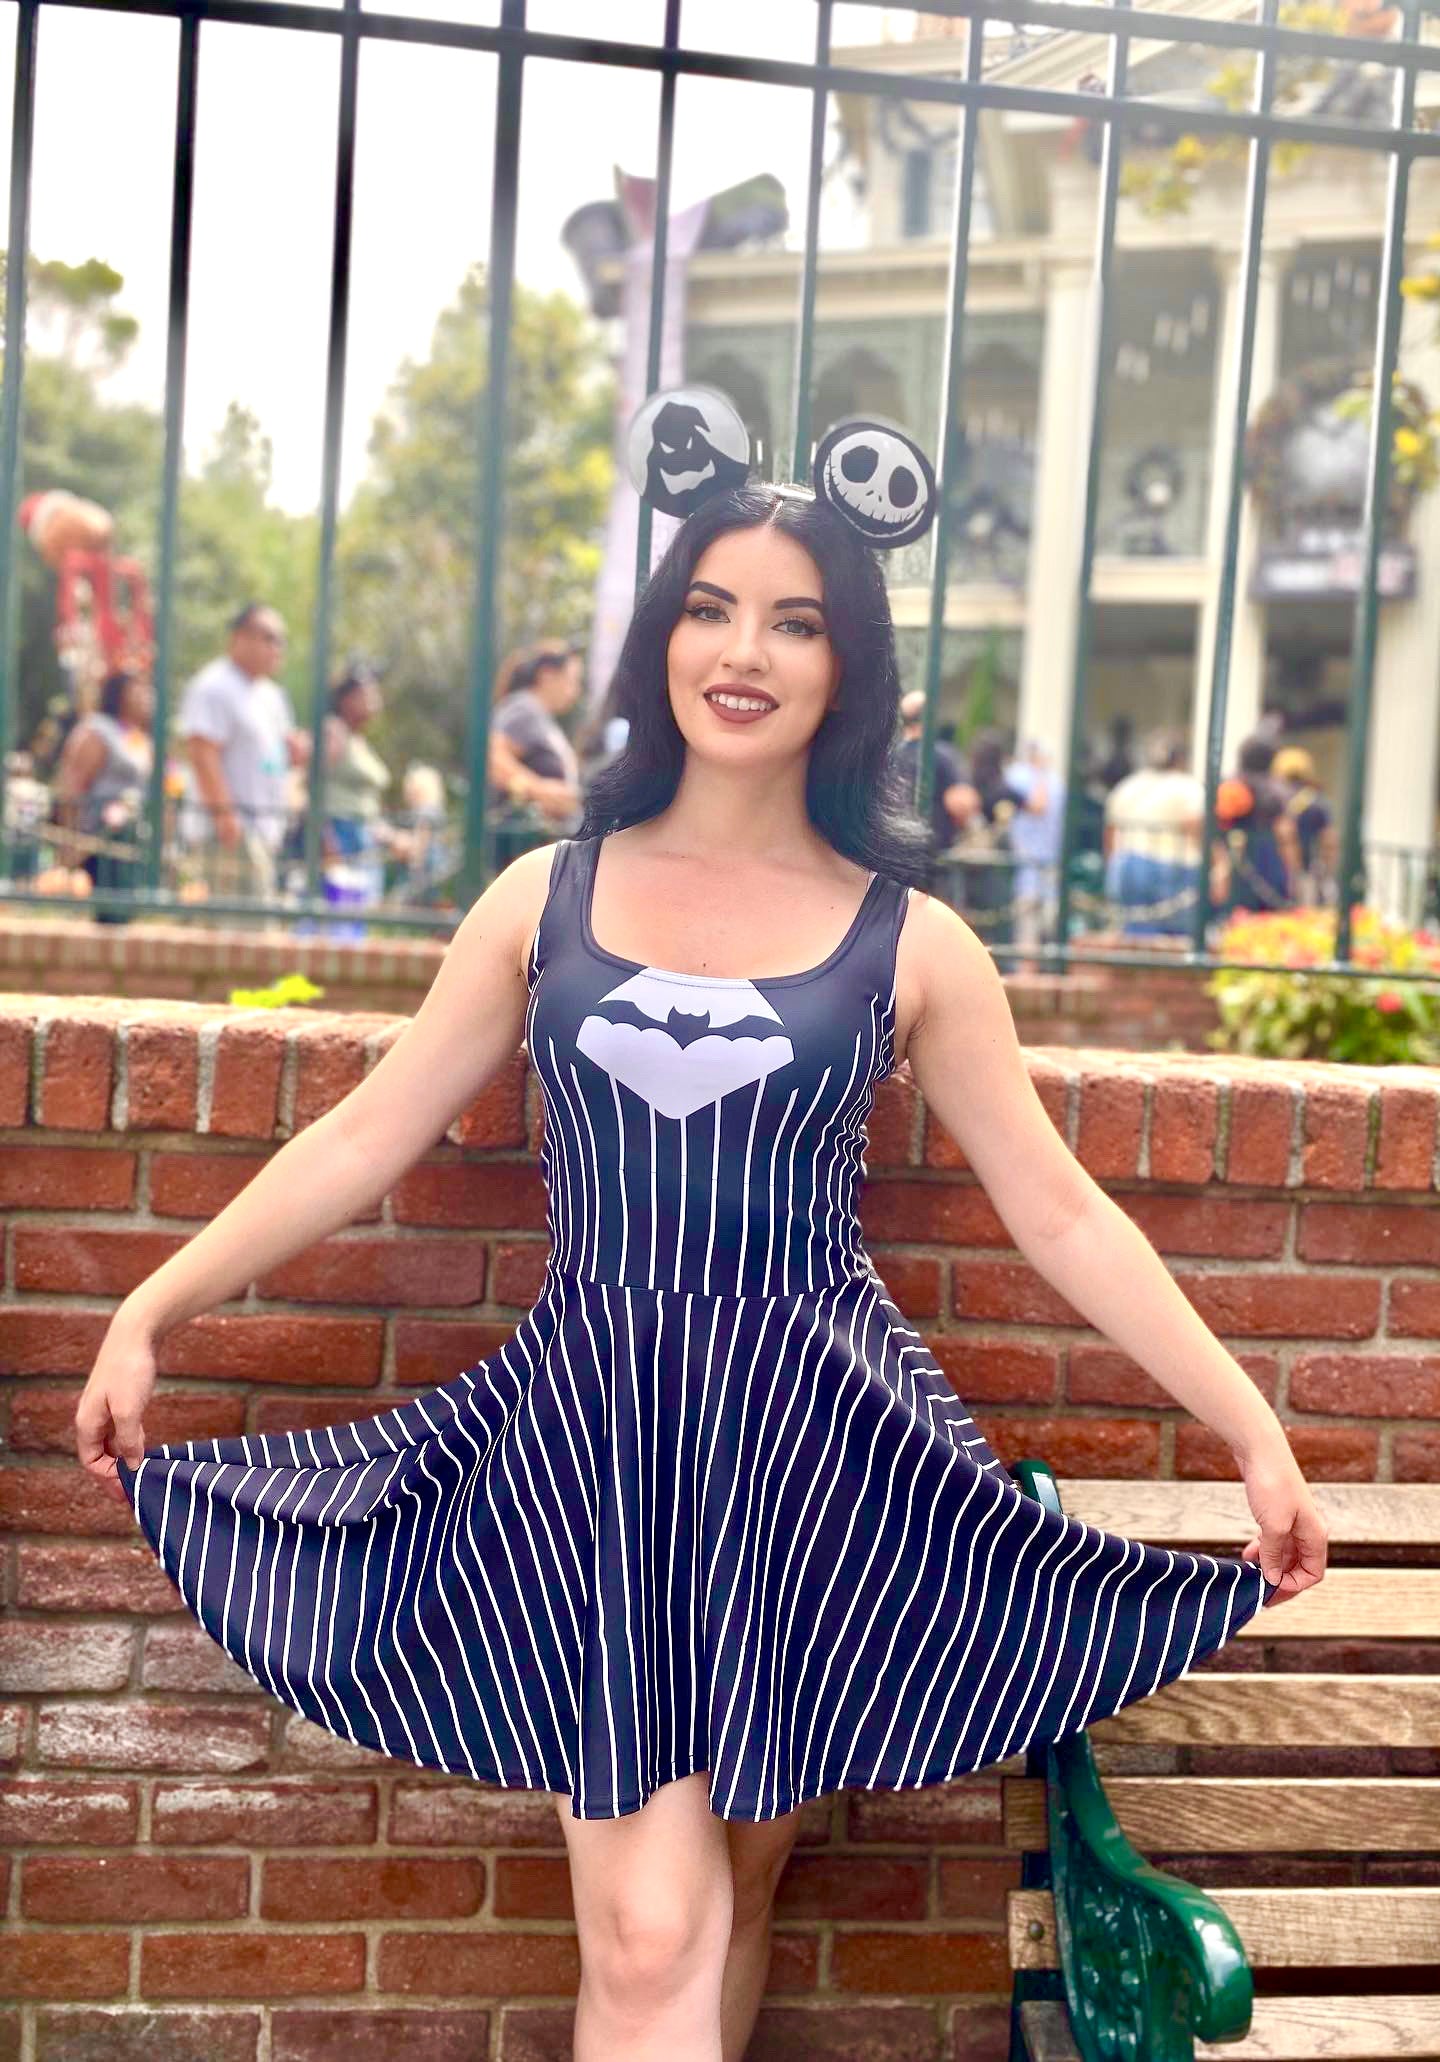 Our model stands outside of the haunted mansion holiday attraction showing off her jack skellington dress while at Disneyland.